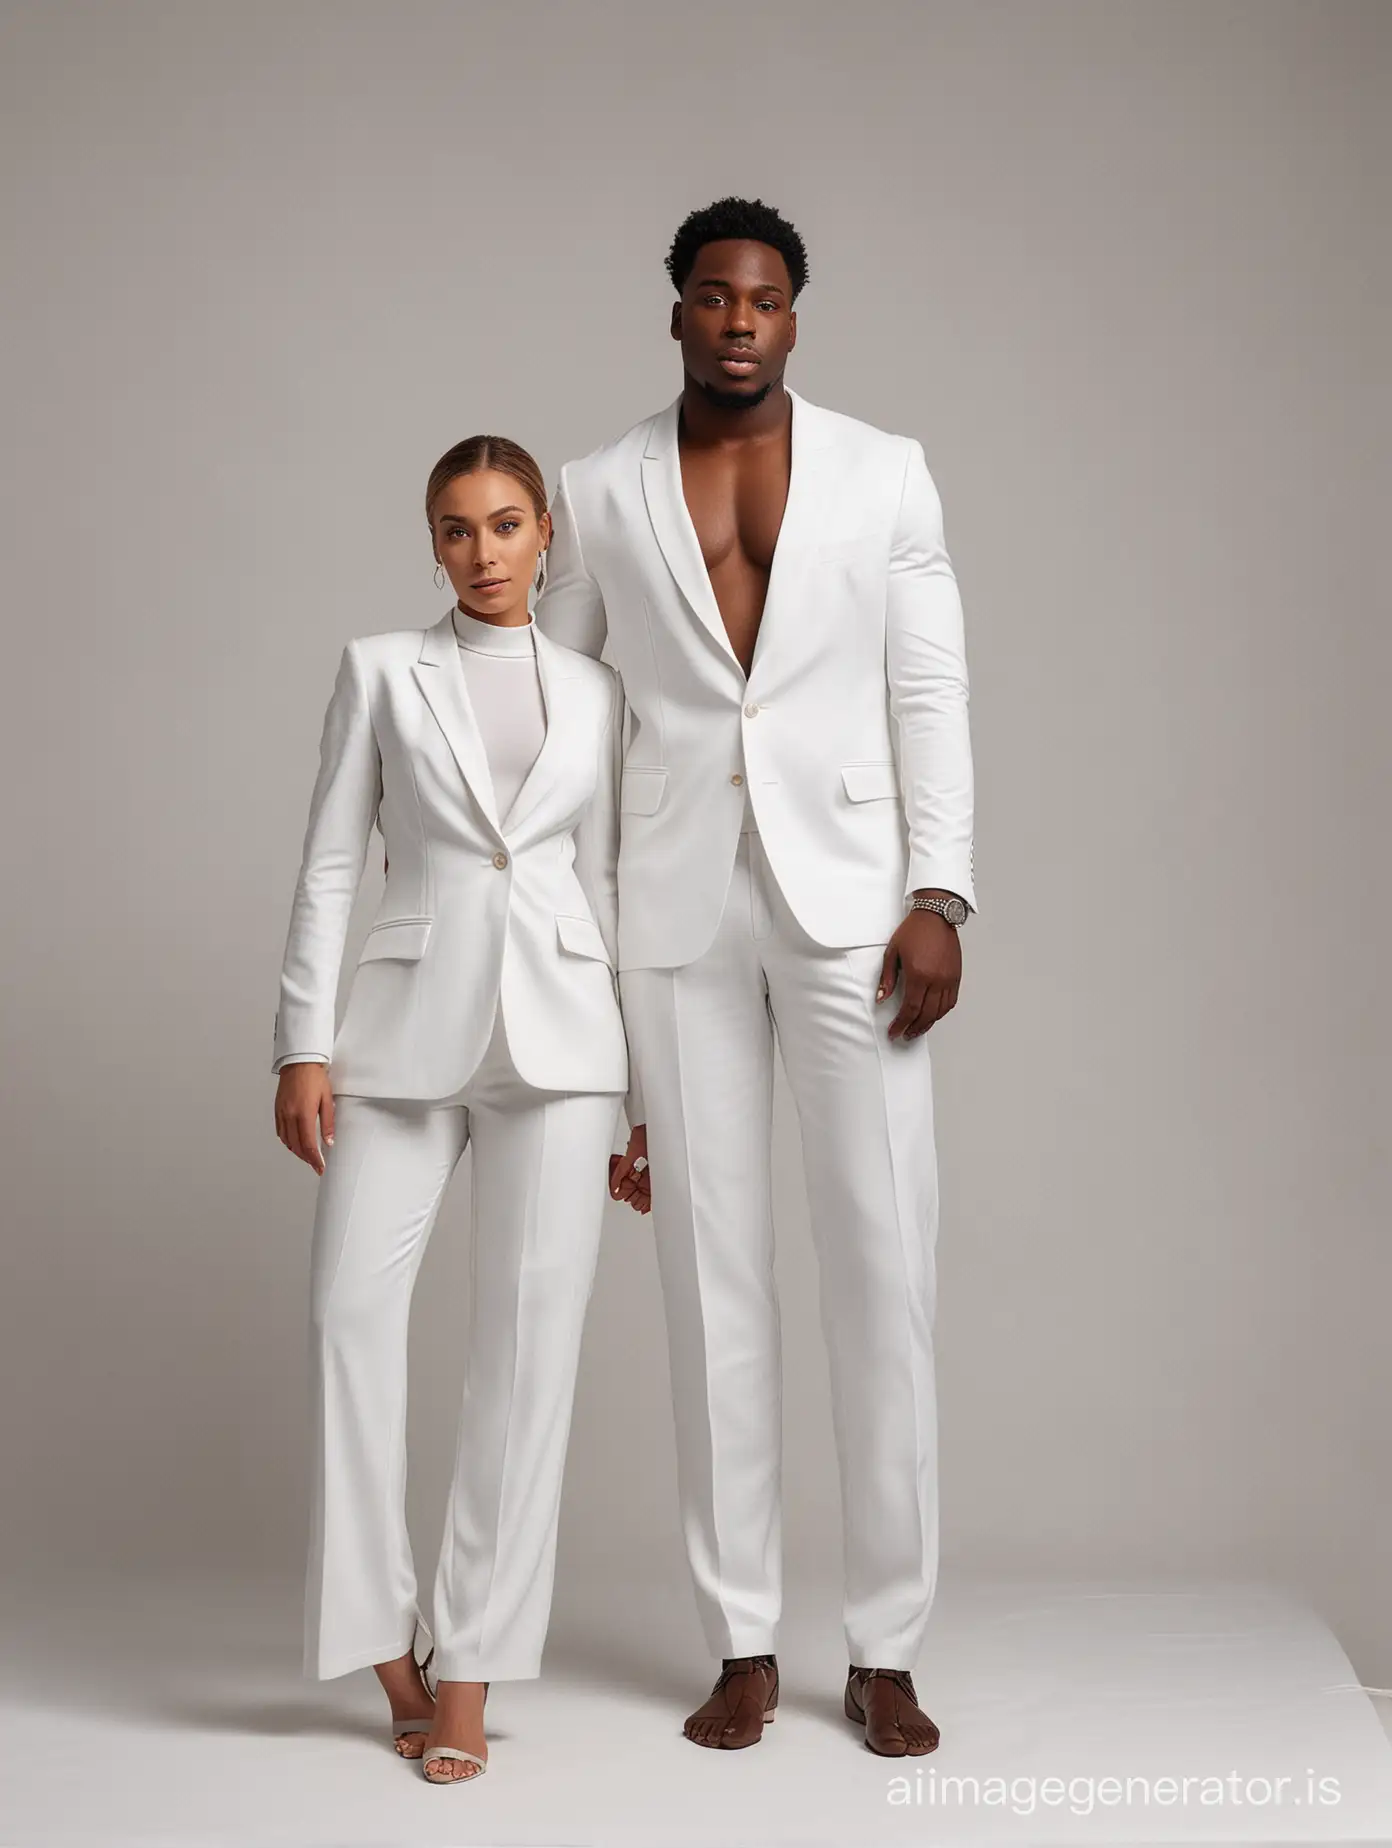 Elegant-Black-Couple-in-Matching-White-Suits-Standing-Together